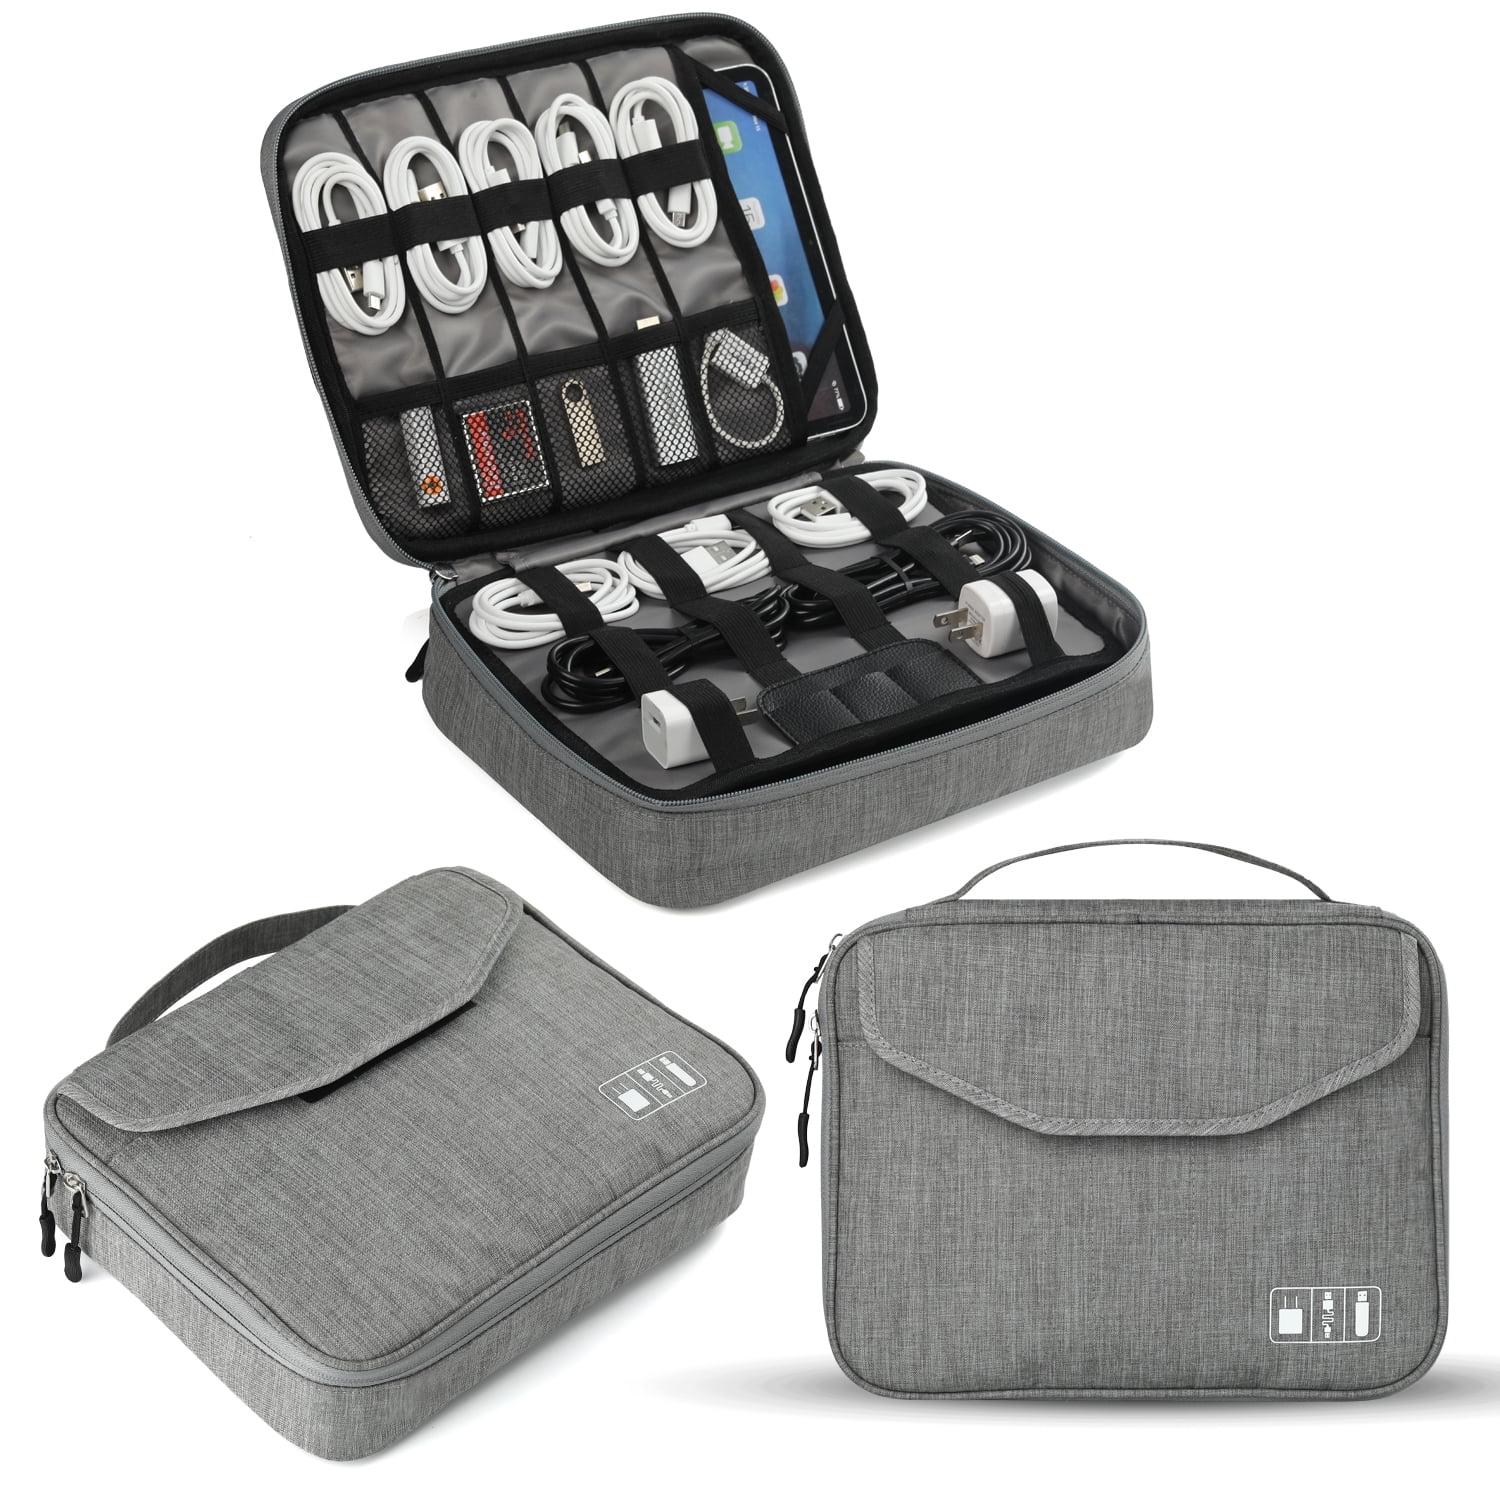 Slim Bag and Purse Organizer, For Travel, Size/Dimension: 11.25 X